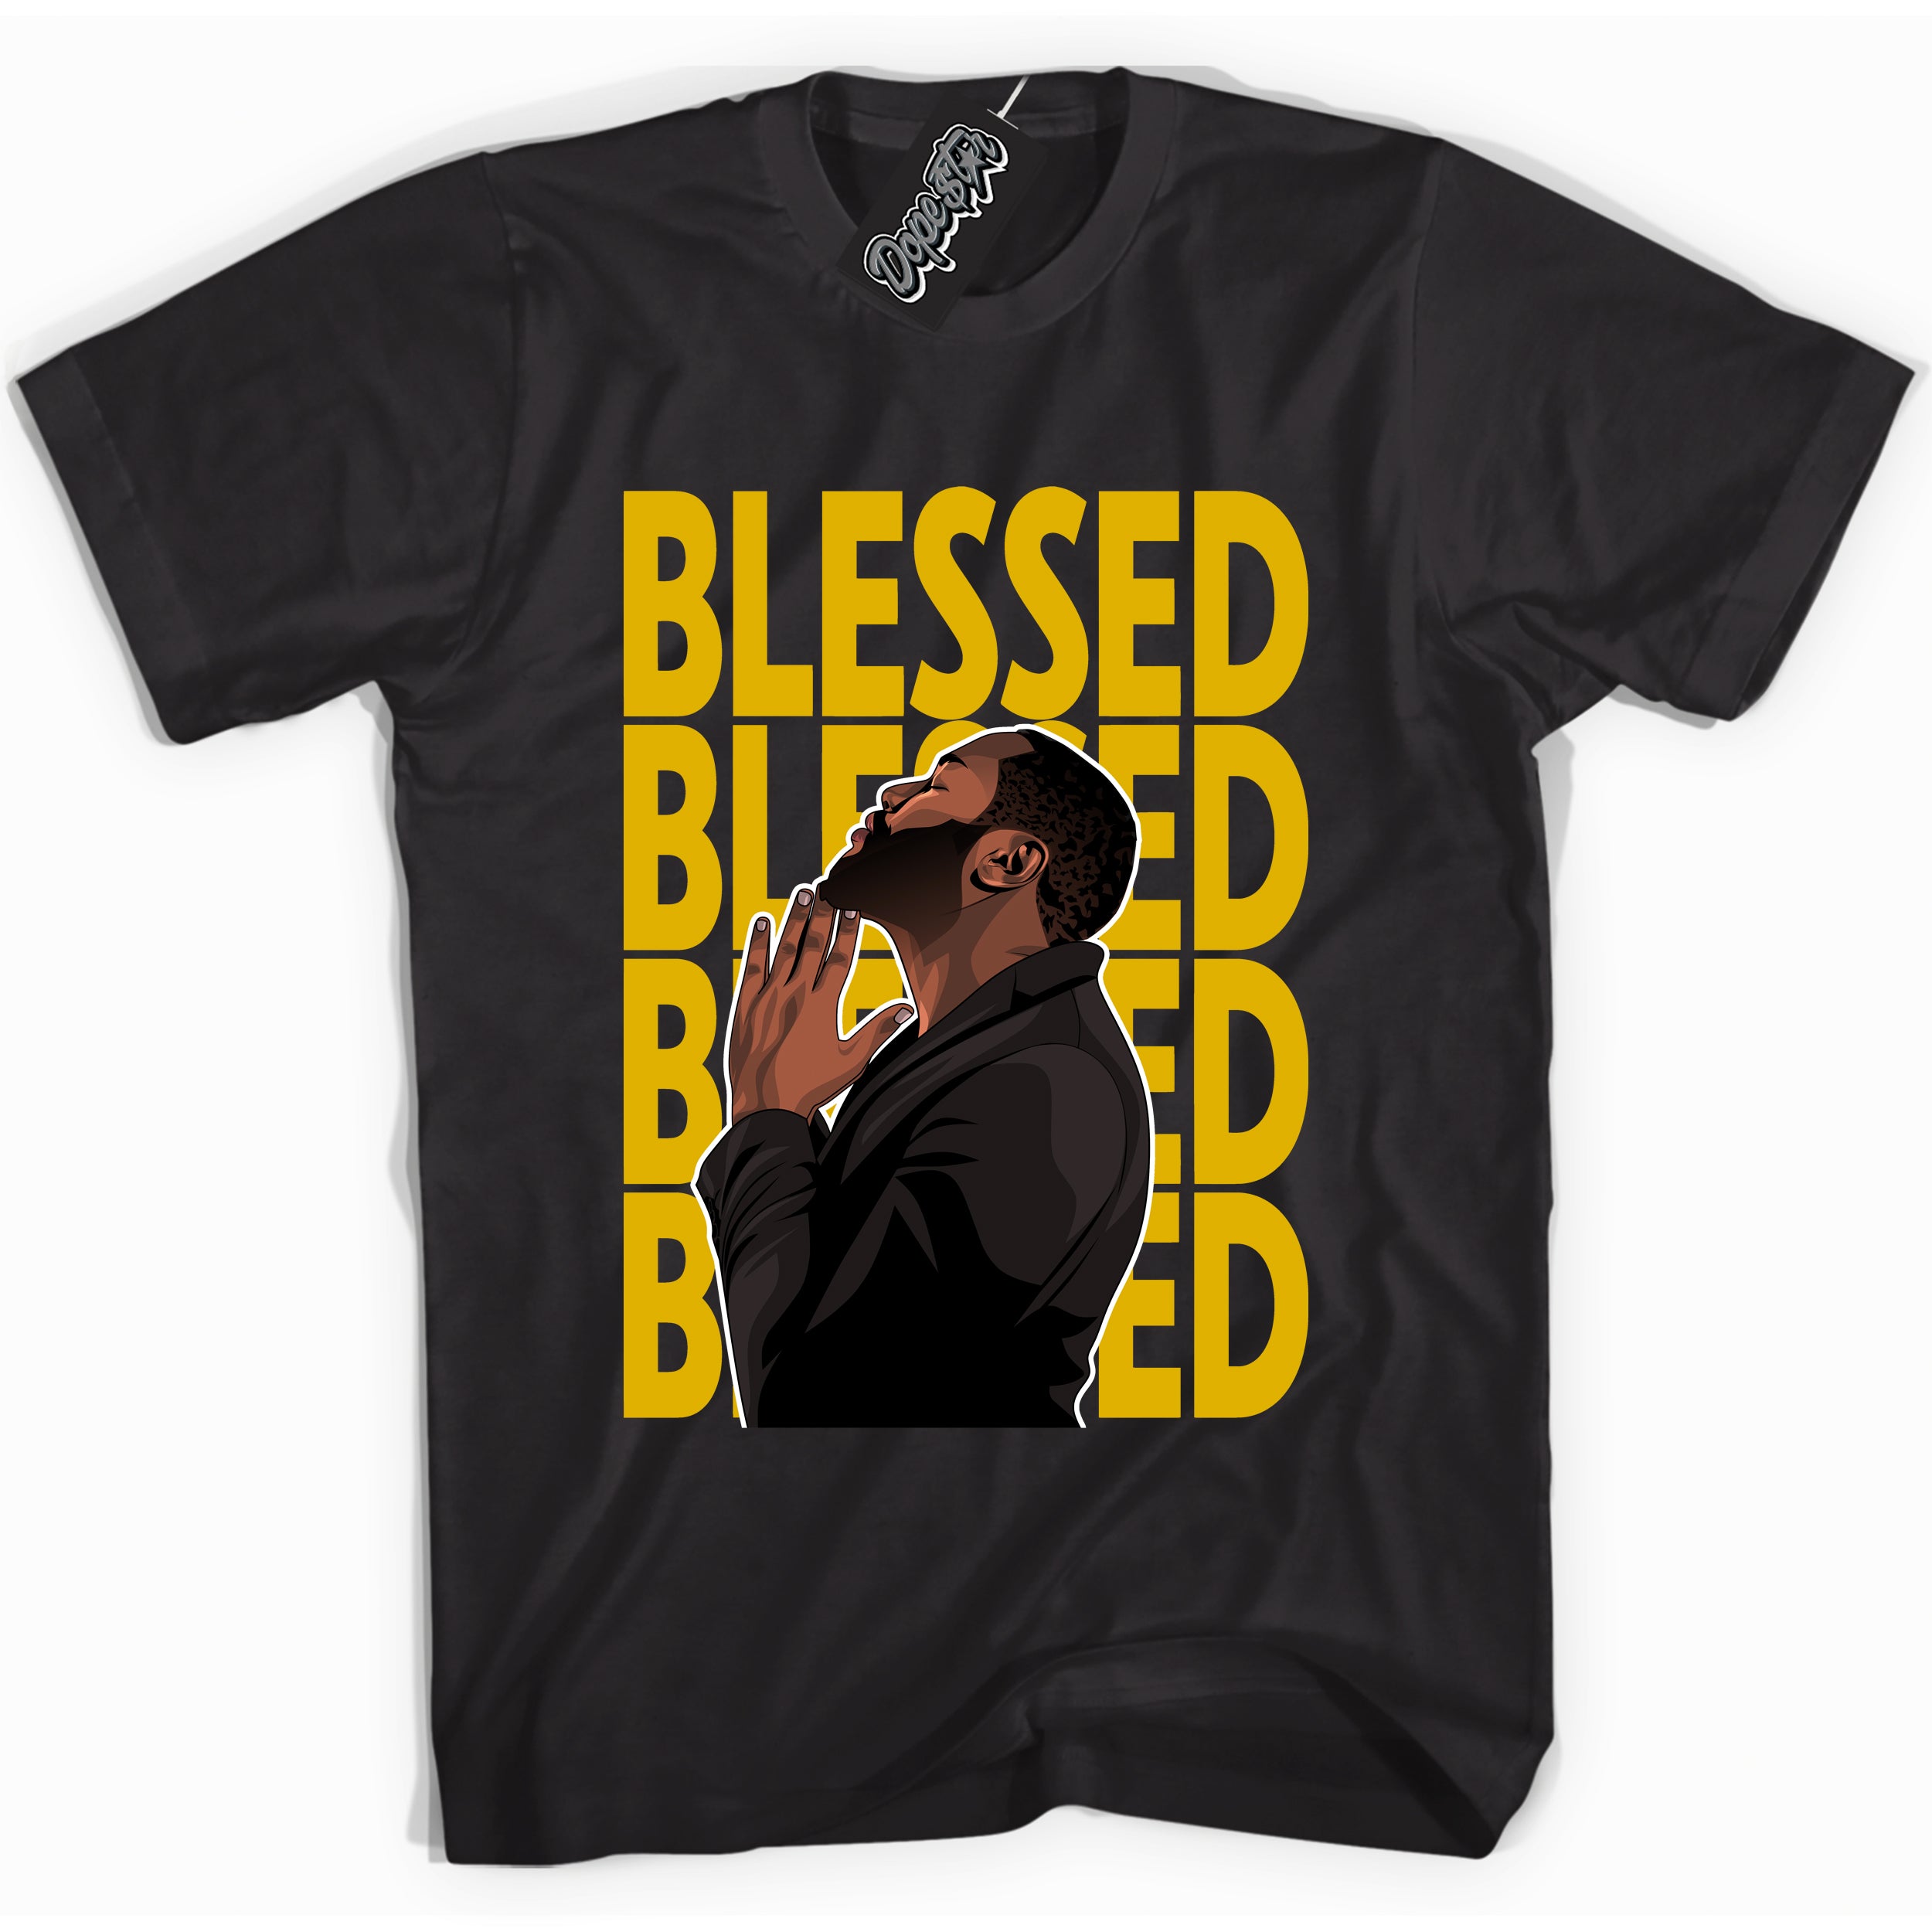 Cool Black Shirt With God Blessed design That Perfectly Matches YELLOW OCHRE 6s Sneakers.